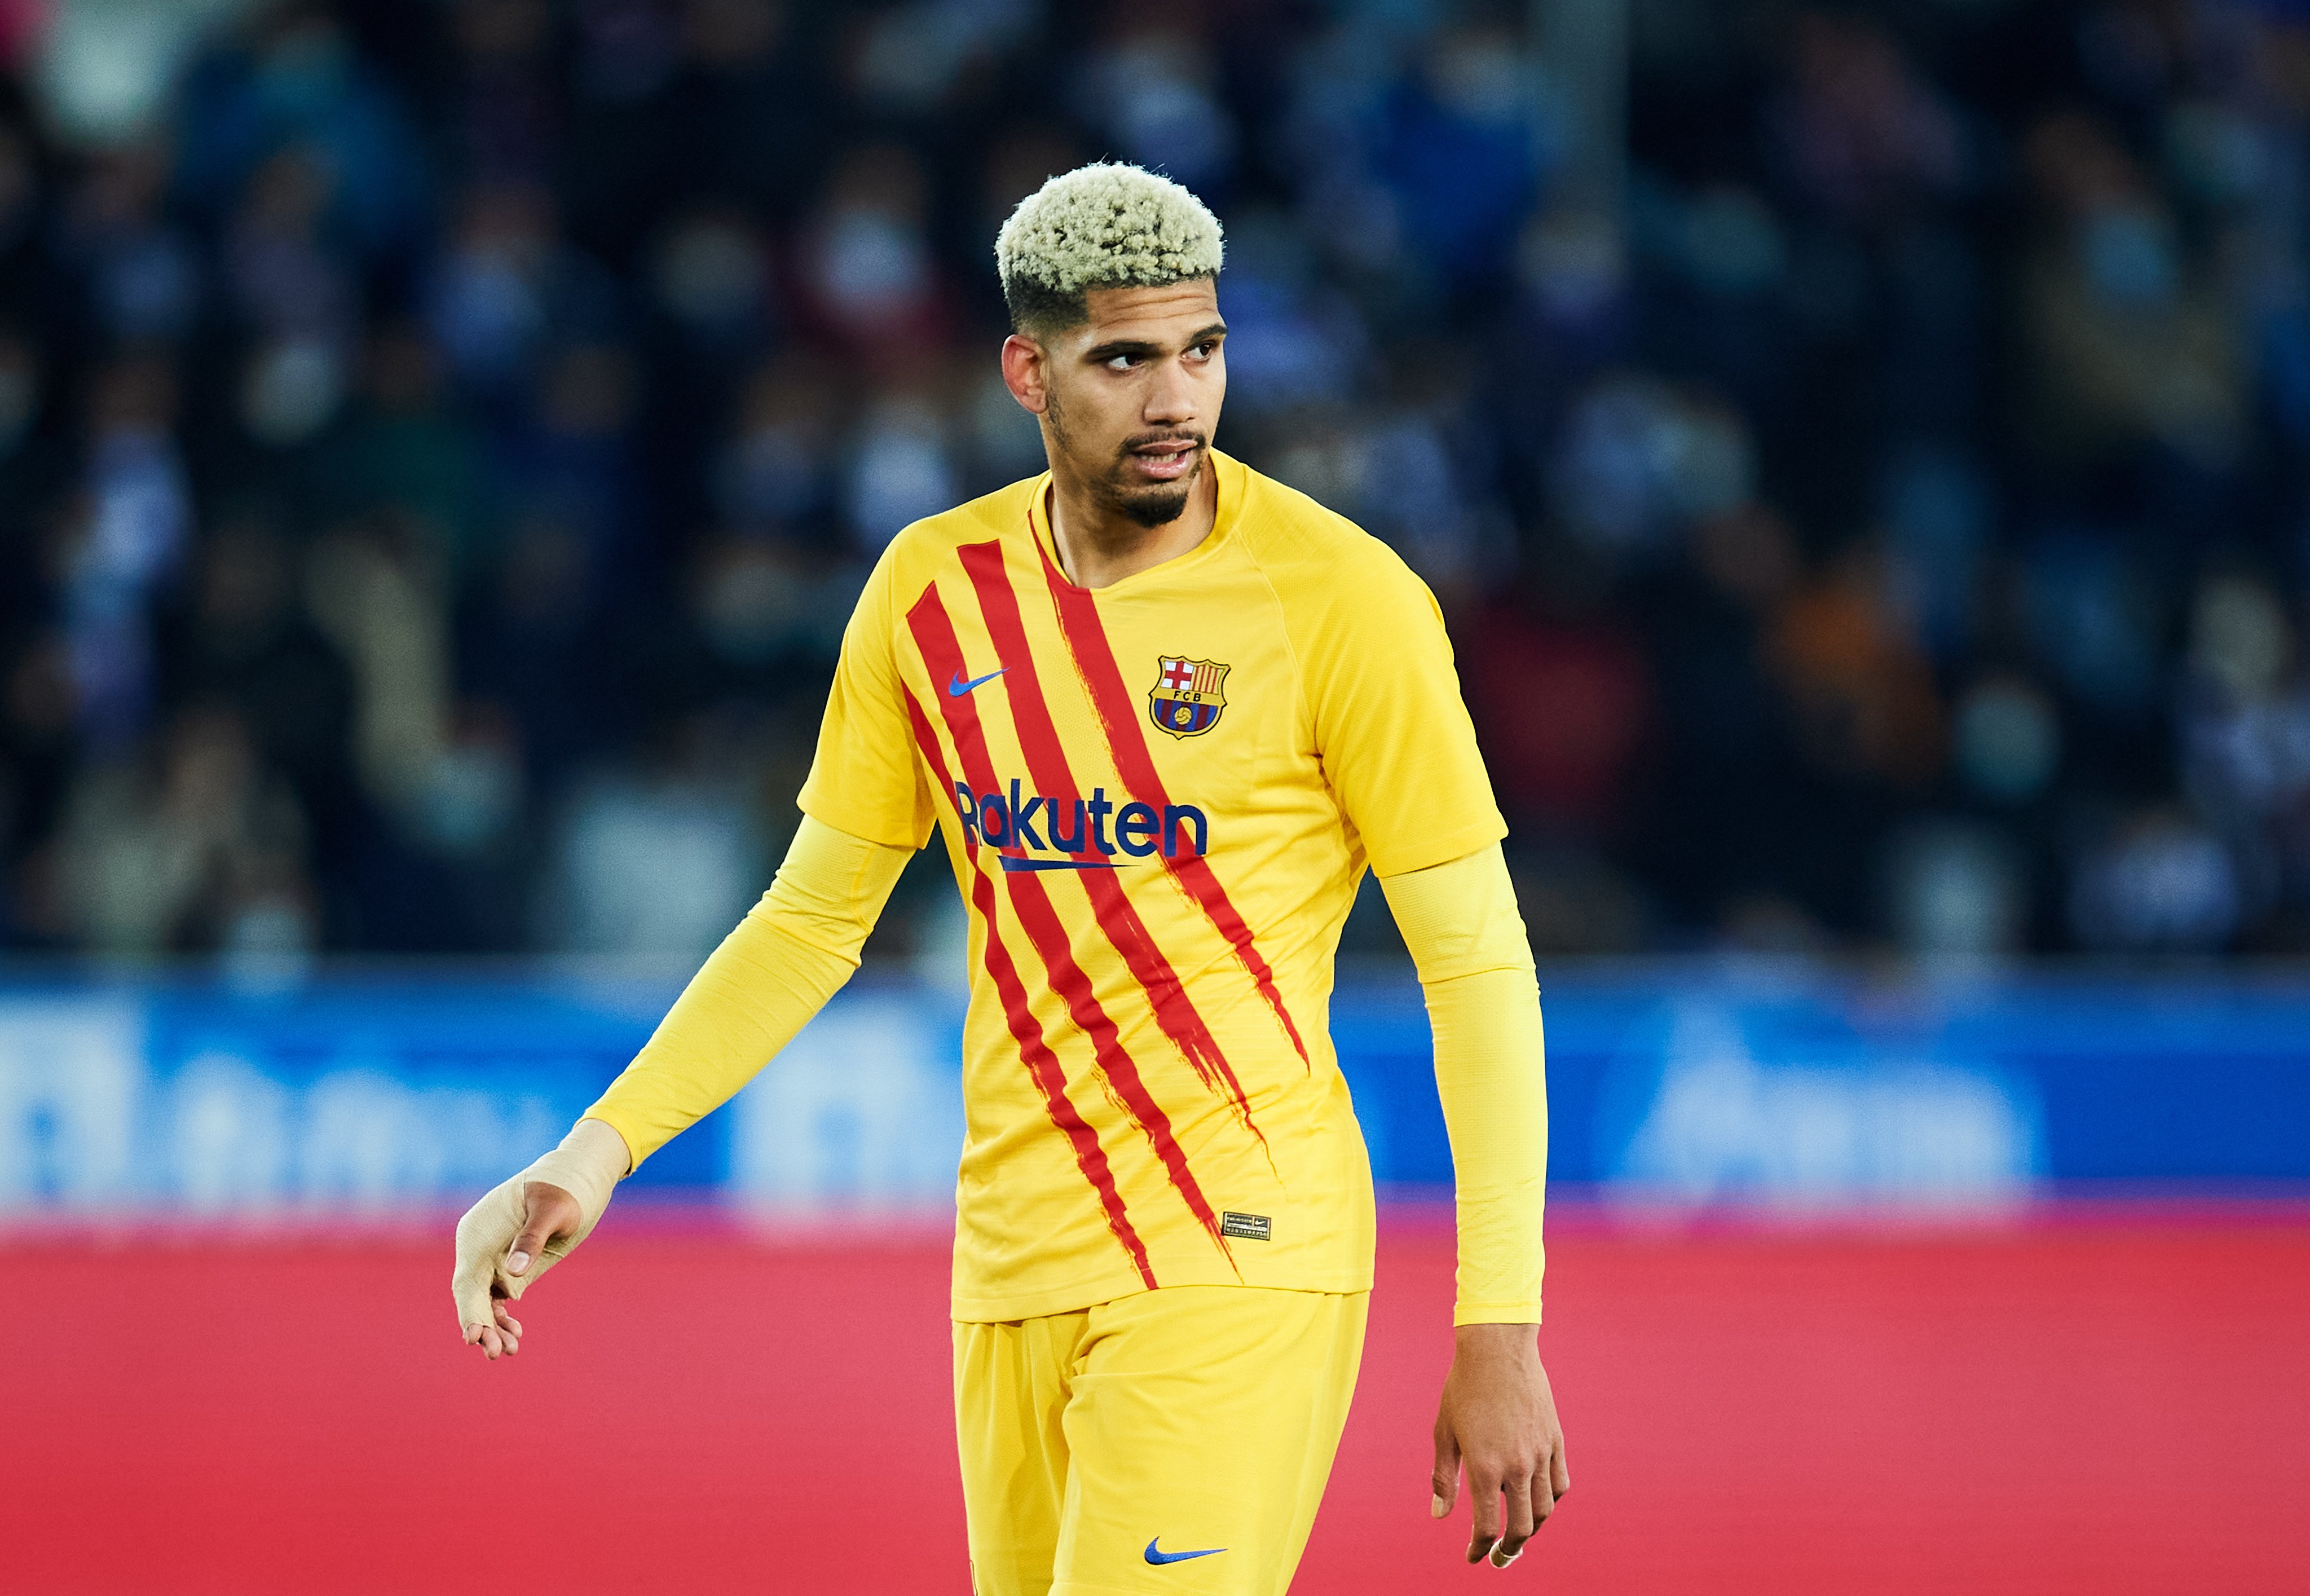 Mirror Football on X: "Barcelona defender Araujo has rejected a new deal in  Spain and is now of interest to Man Utd and Chelsea https://t.co/kh5u2sLnbb  https://t.co/zyHAQXSQT1" / X